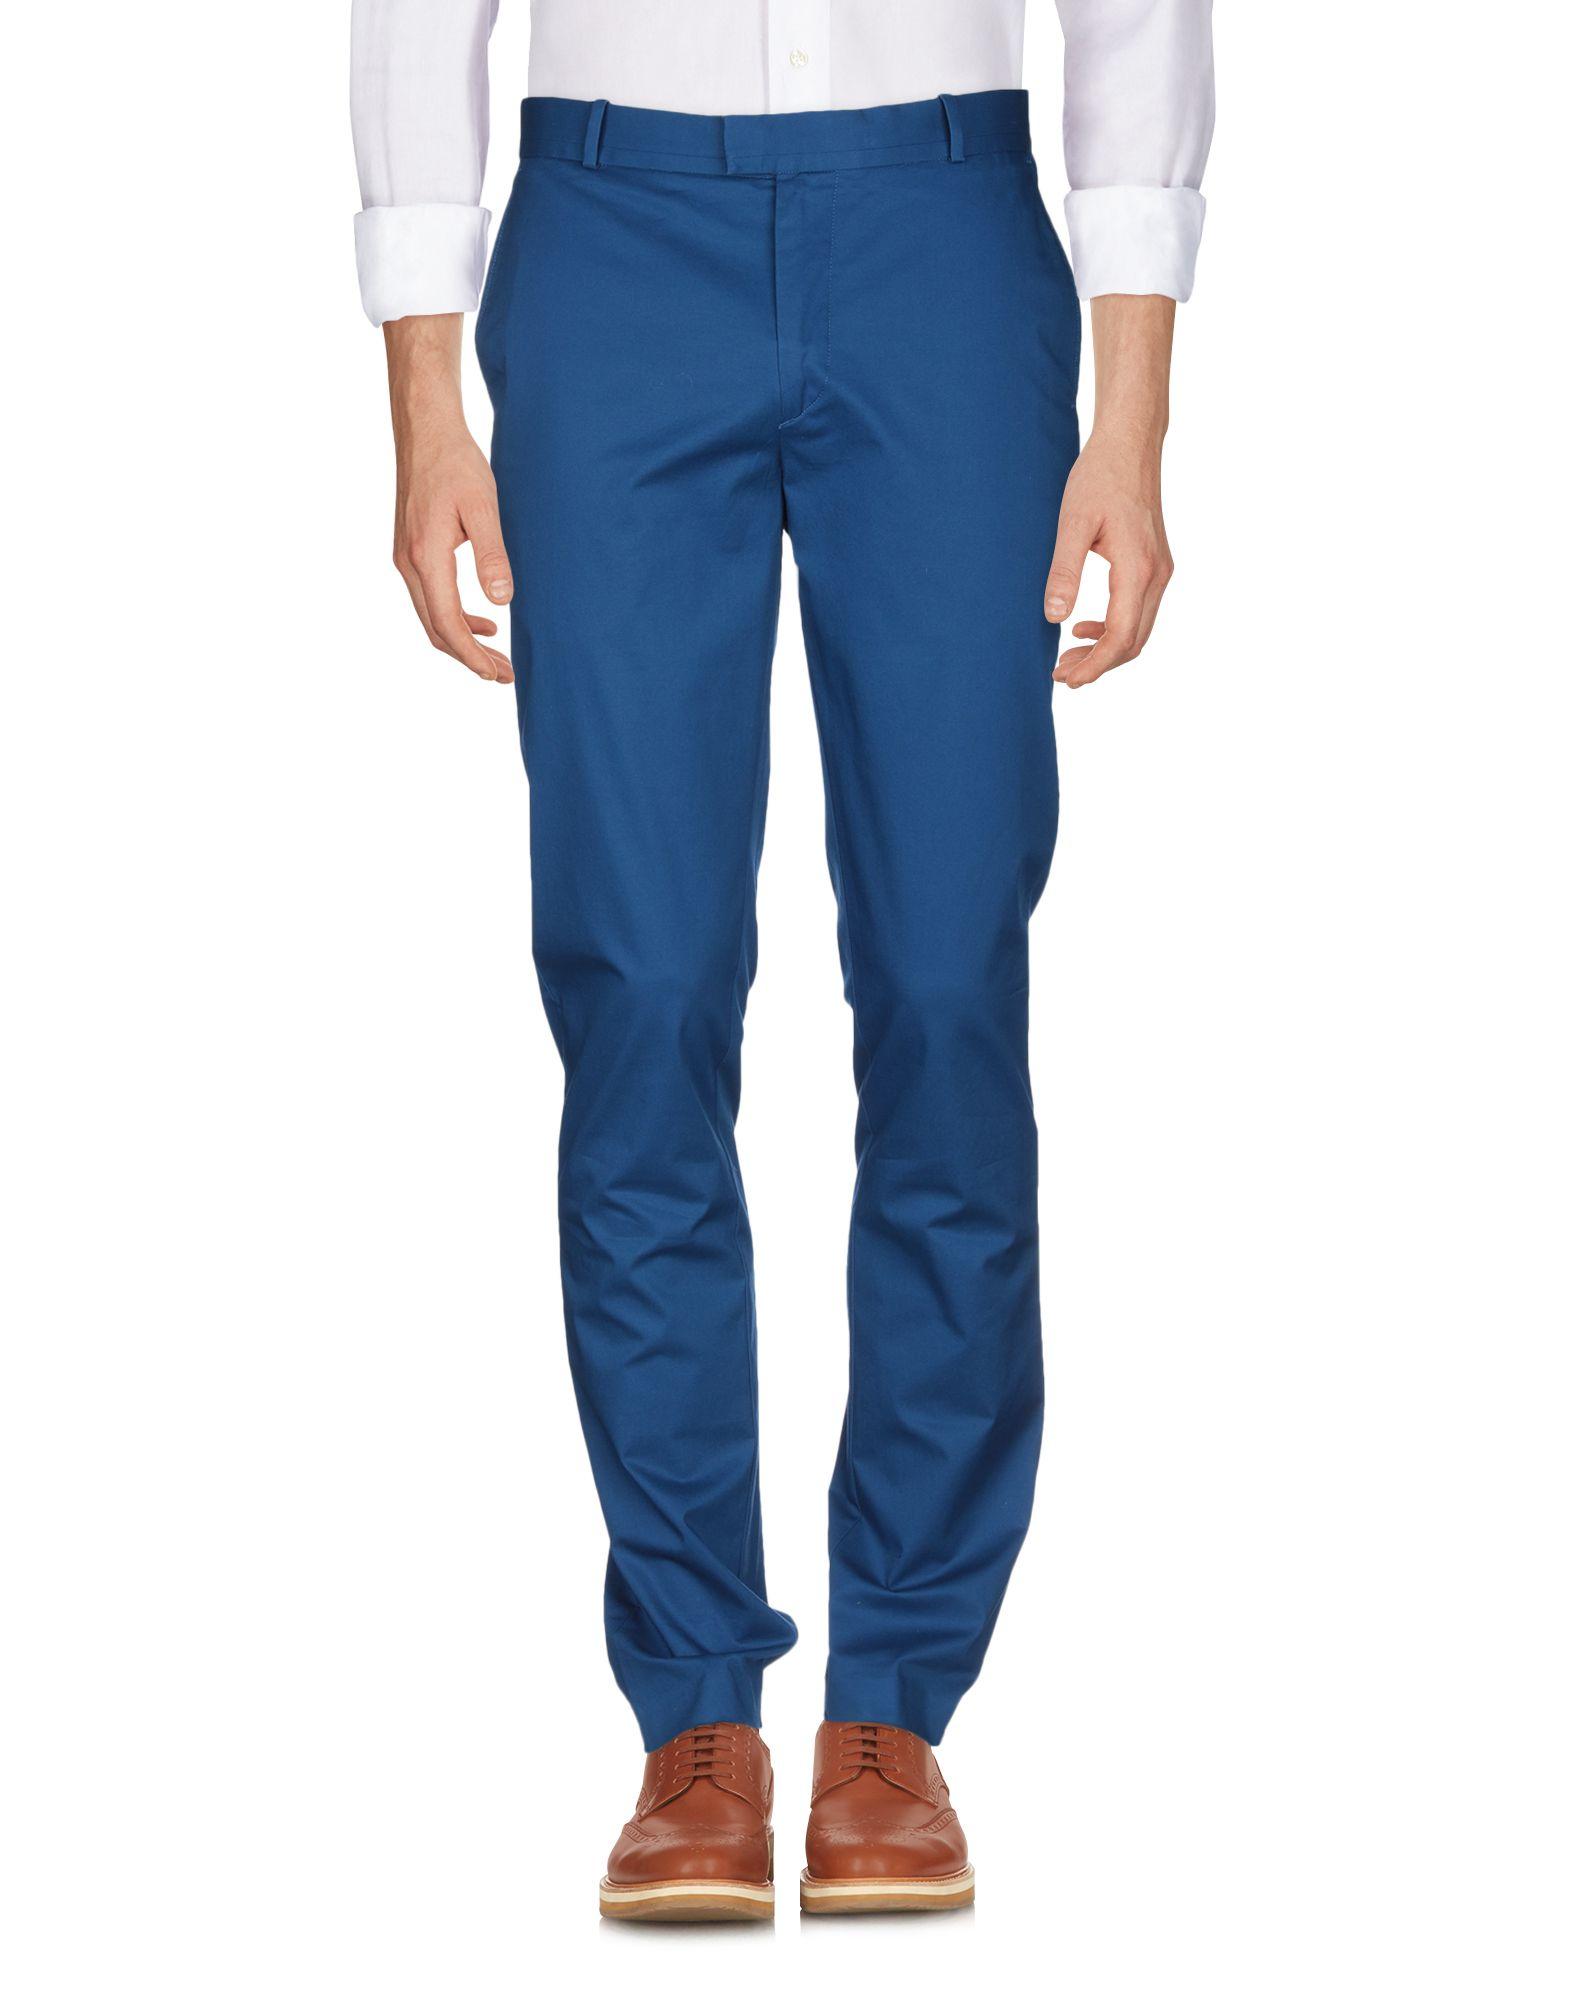 Dockers Cotton Casual Trouser in Blue for Men - Lyst